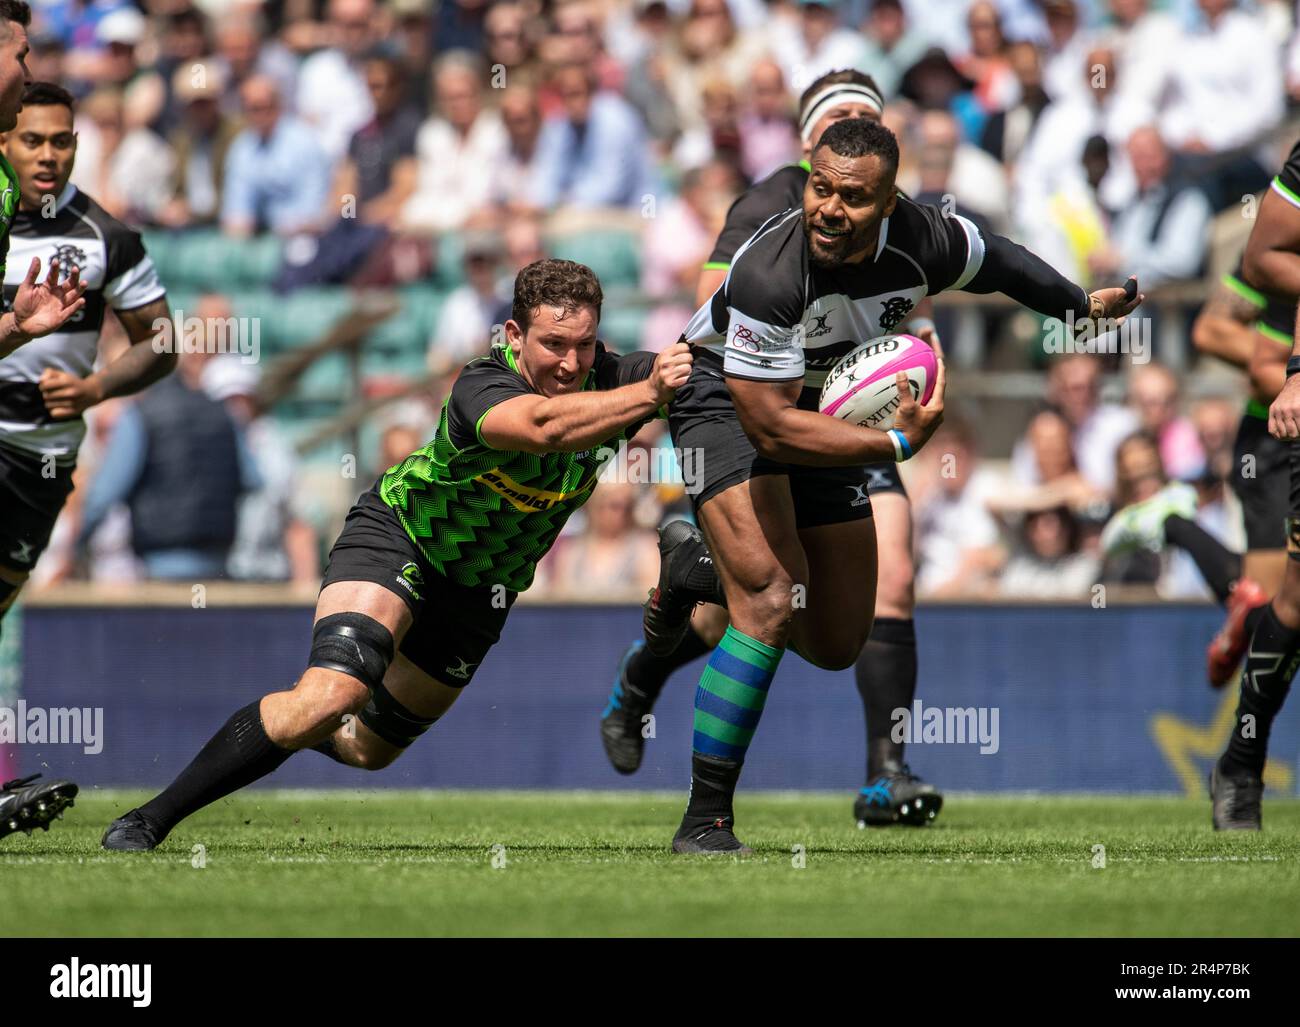 Samu Kerevi of the Barbarians in action during the Killik Cup match between Barbarians and World XV at Twickenham Stadium on May 28, 2023 in London, E Stock Photo